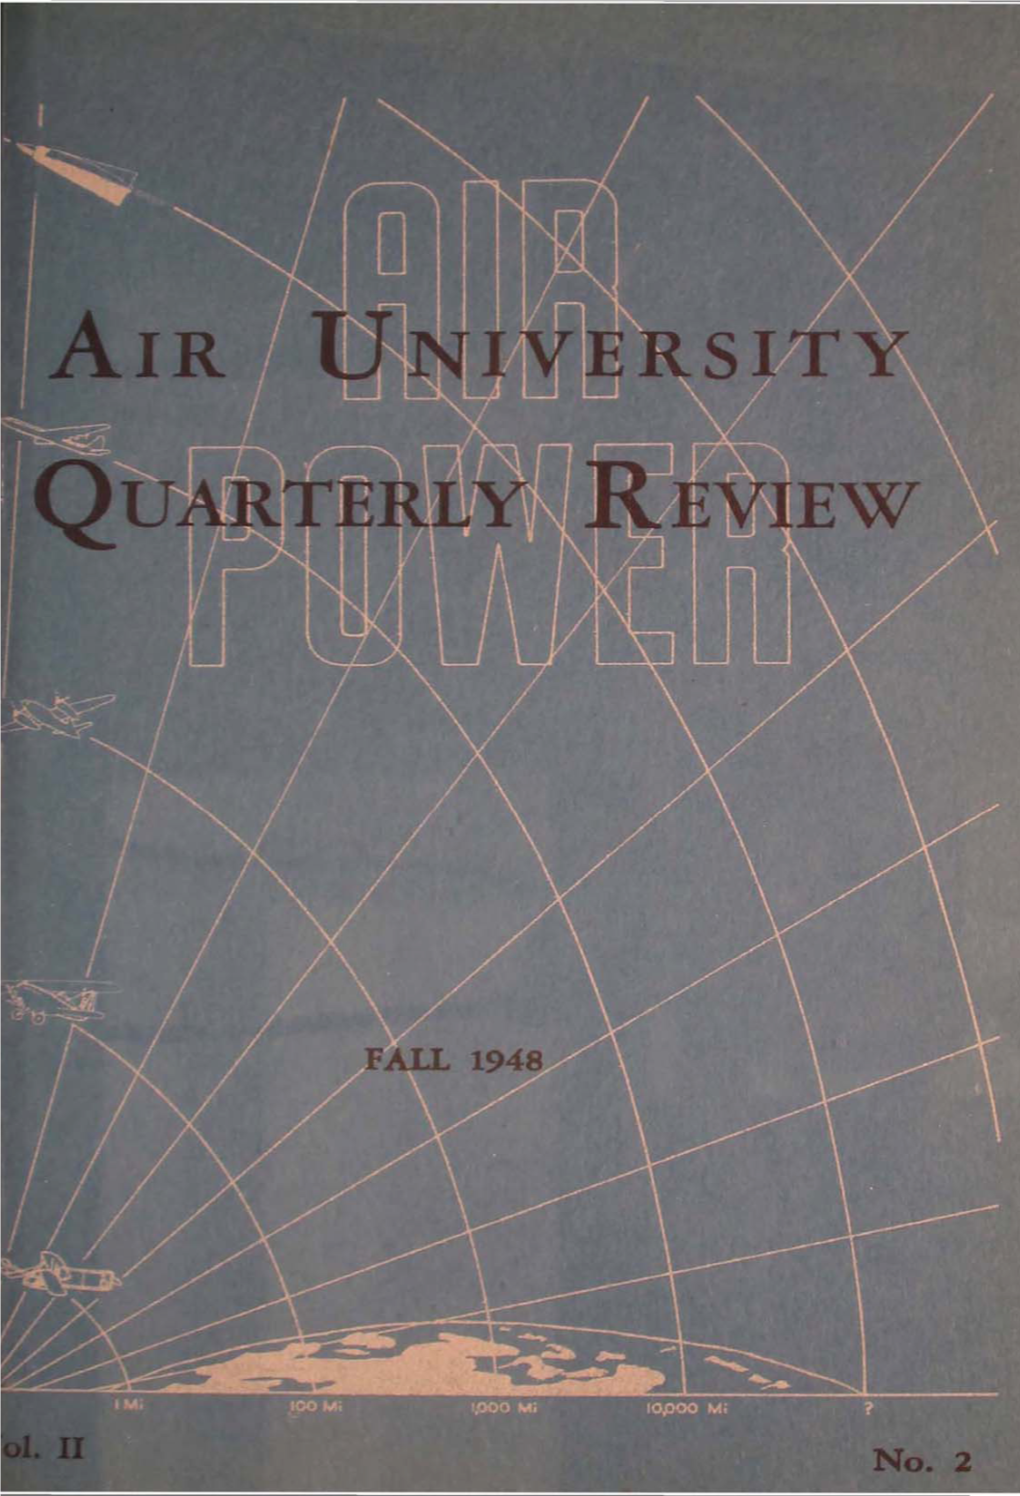 Air University Quarterly Review: Fall 1948 Volume II Number 2